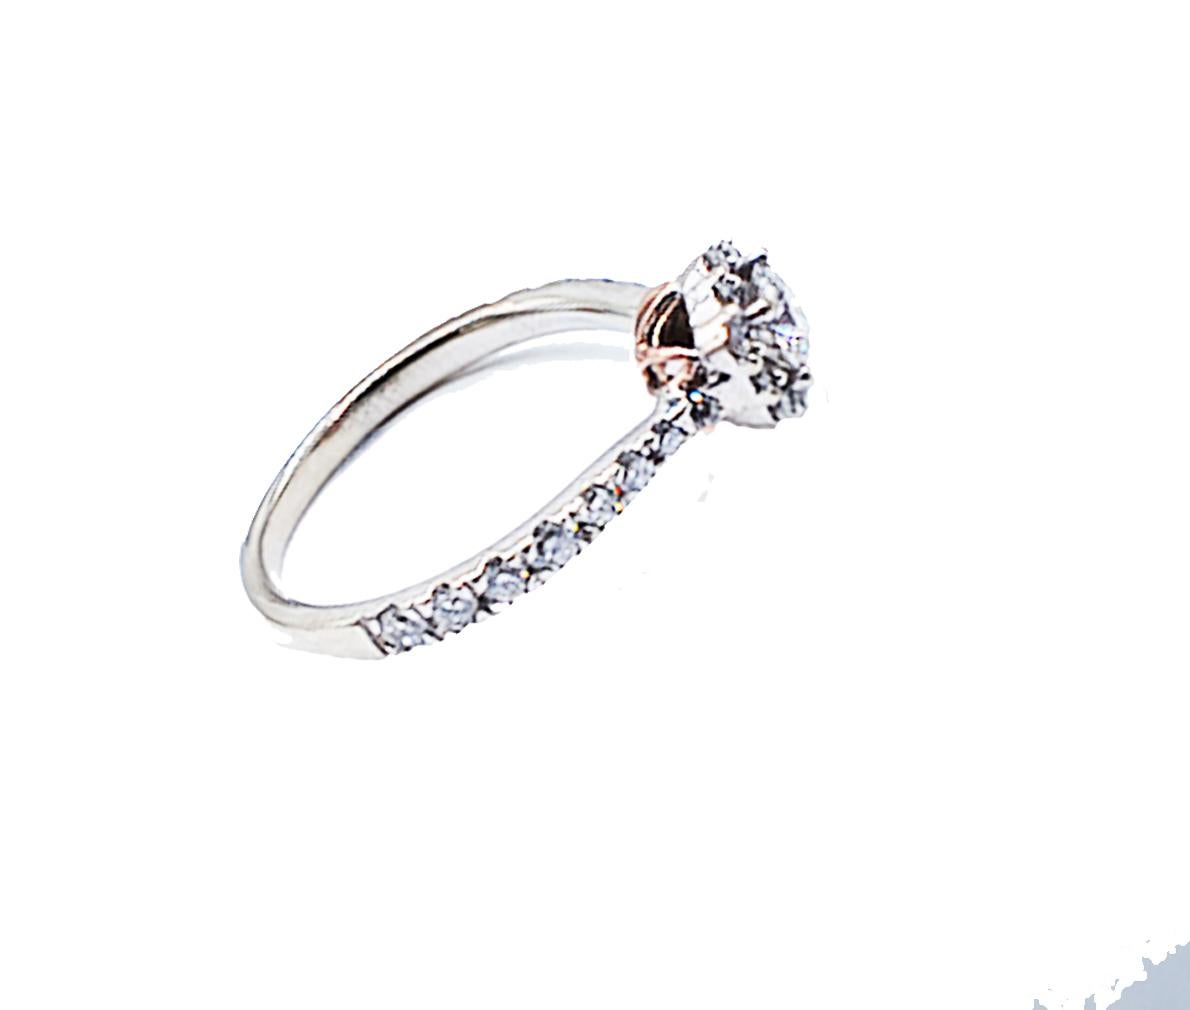 Beautiful Custom-made halo engagement ring is beautifully crafted with an under-cradle pink gold design. The ring measures a 7.30 mm halo and shank that graduates 2 mm from the top to bottom of ring. The height of the halo is 6.03 mm
The ring